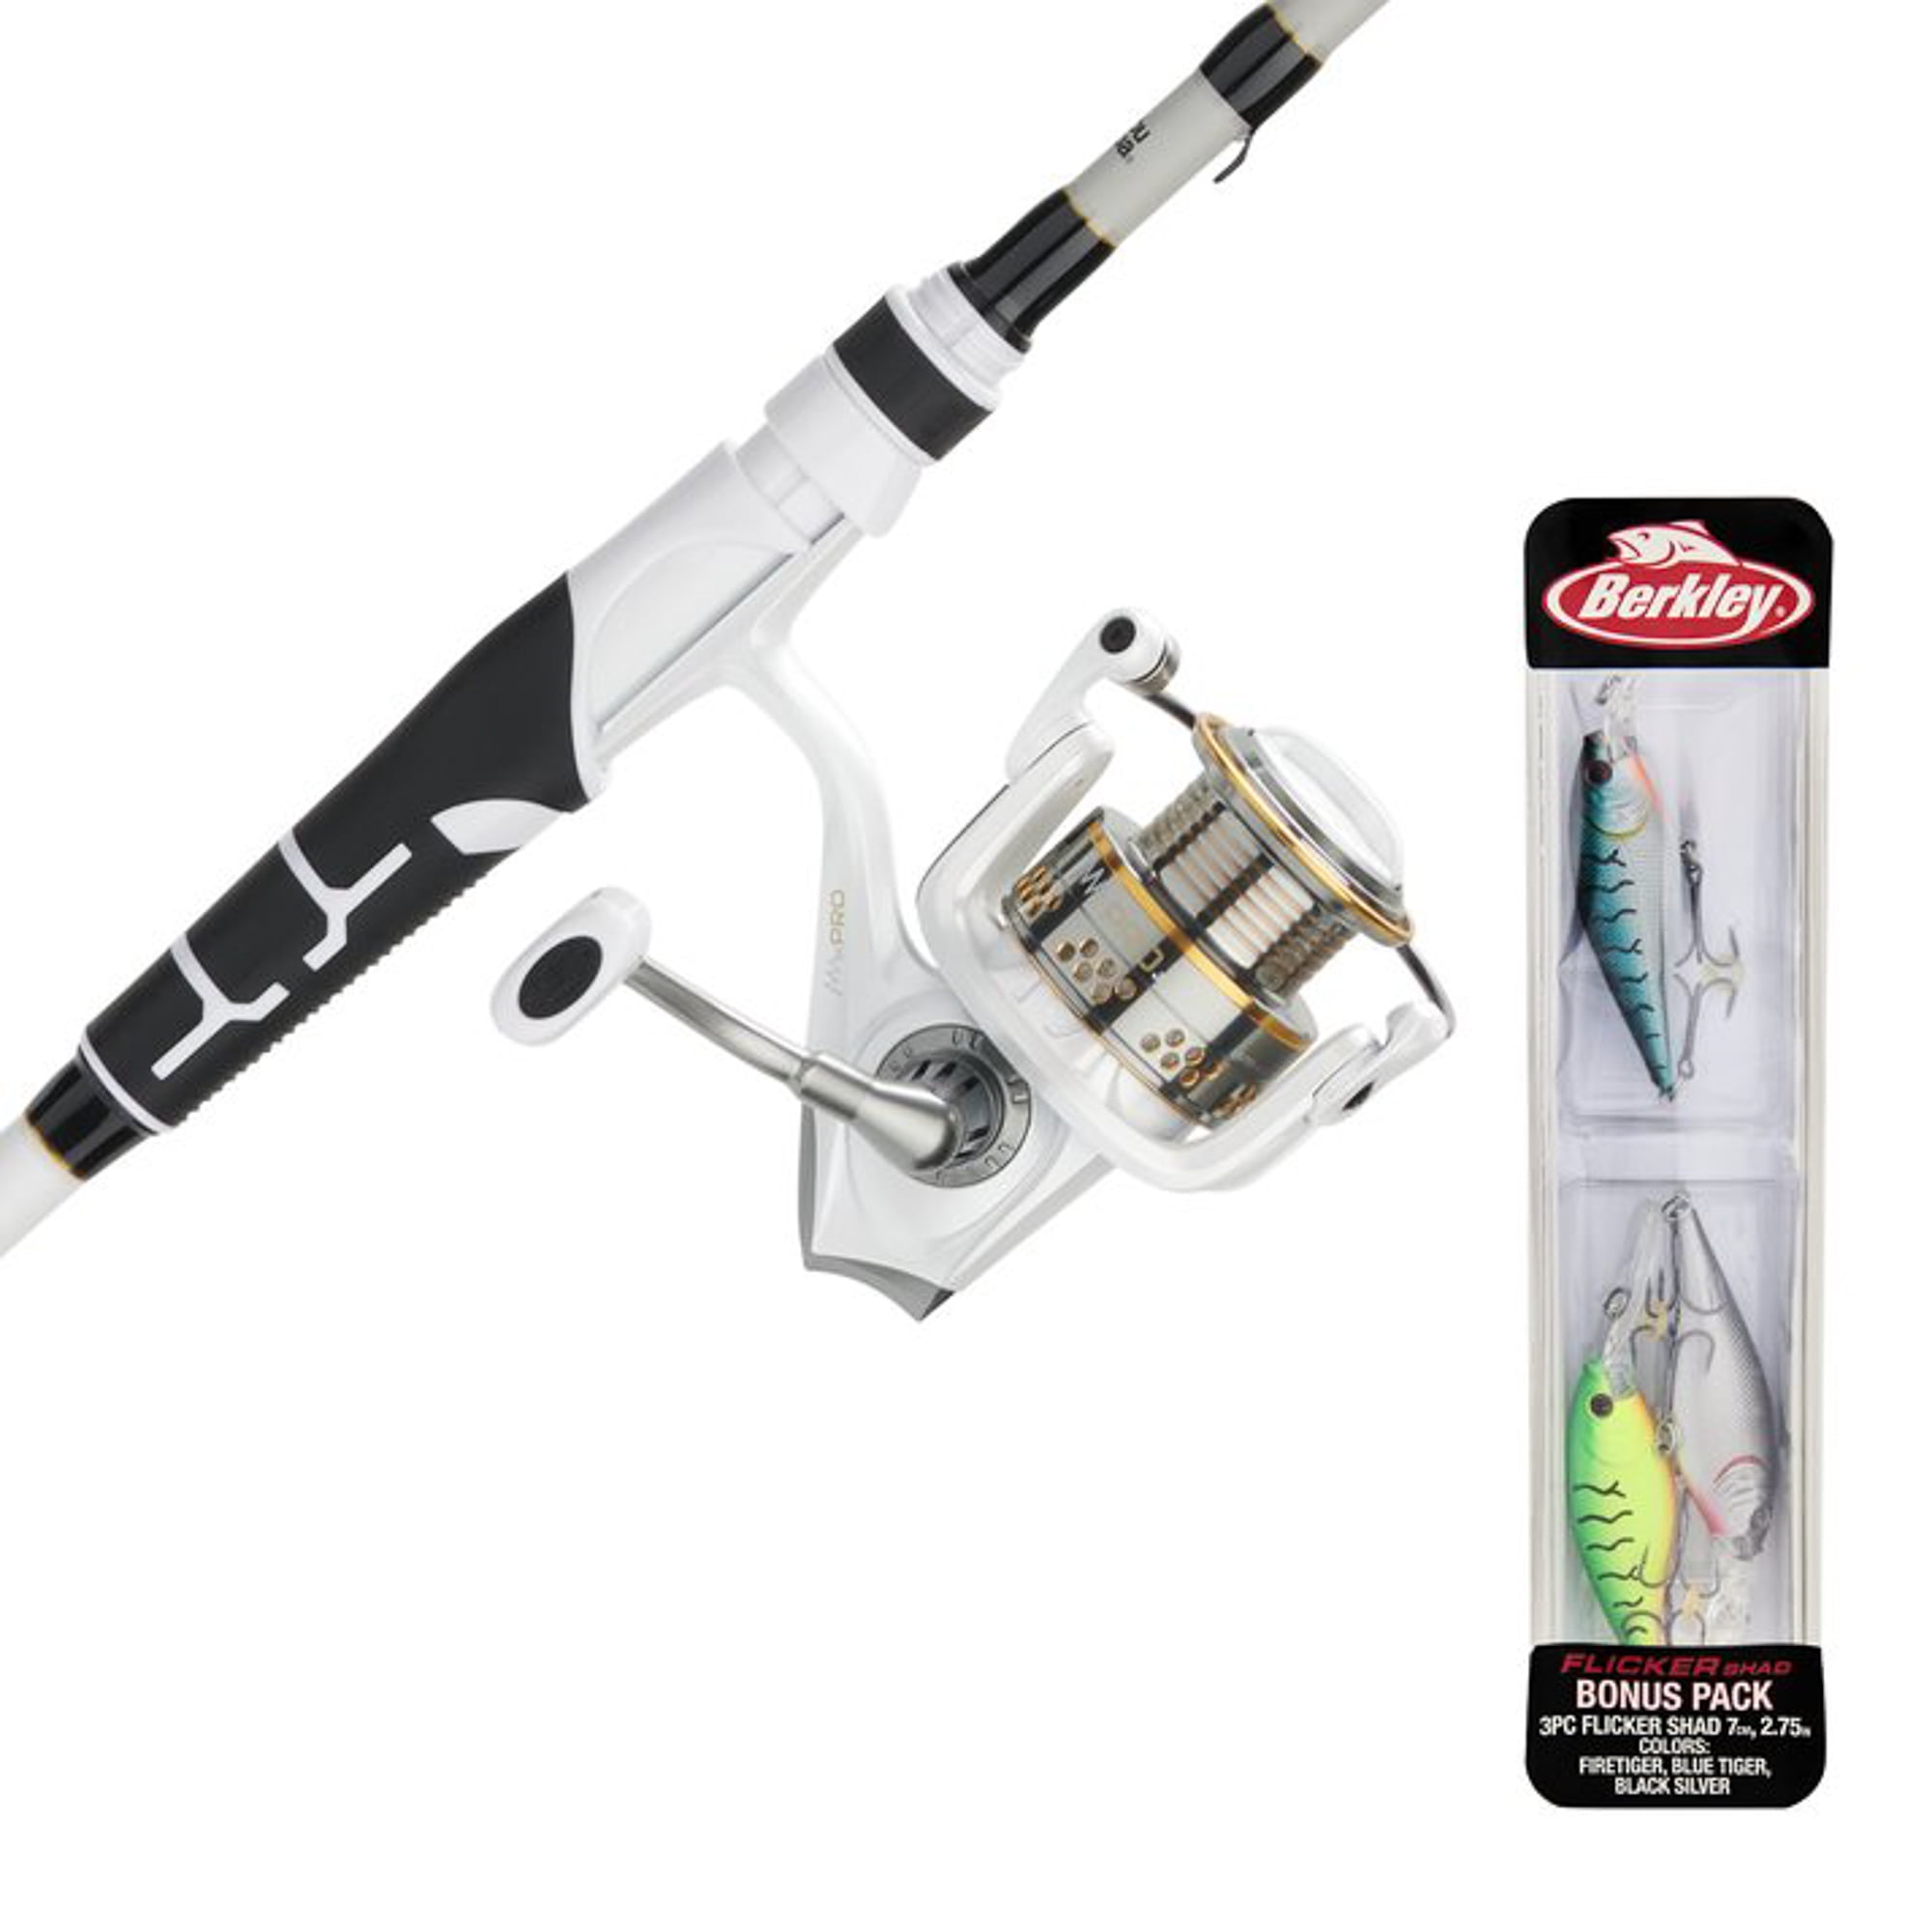 Catfish Pro Tournament Series Rod and Reel Combos